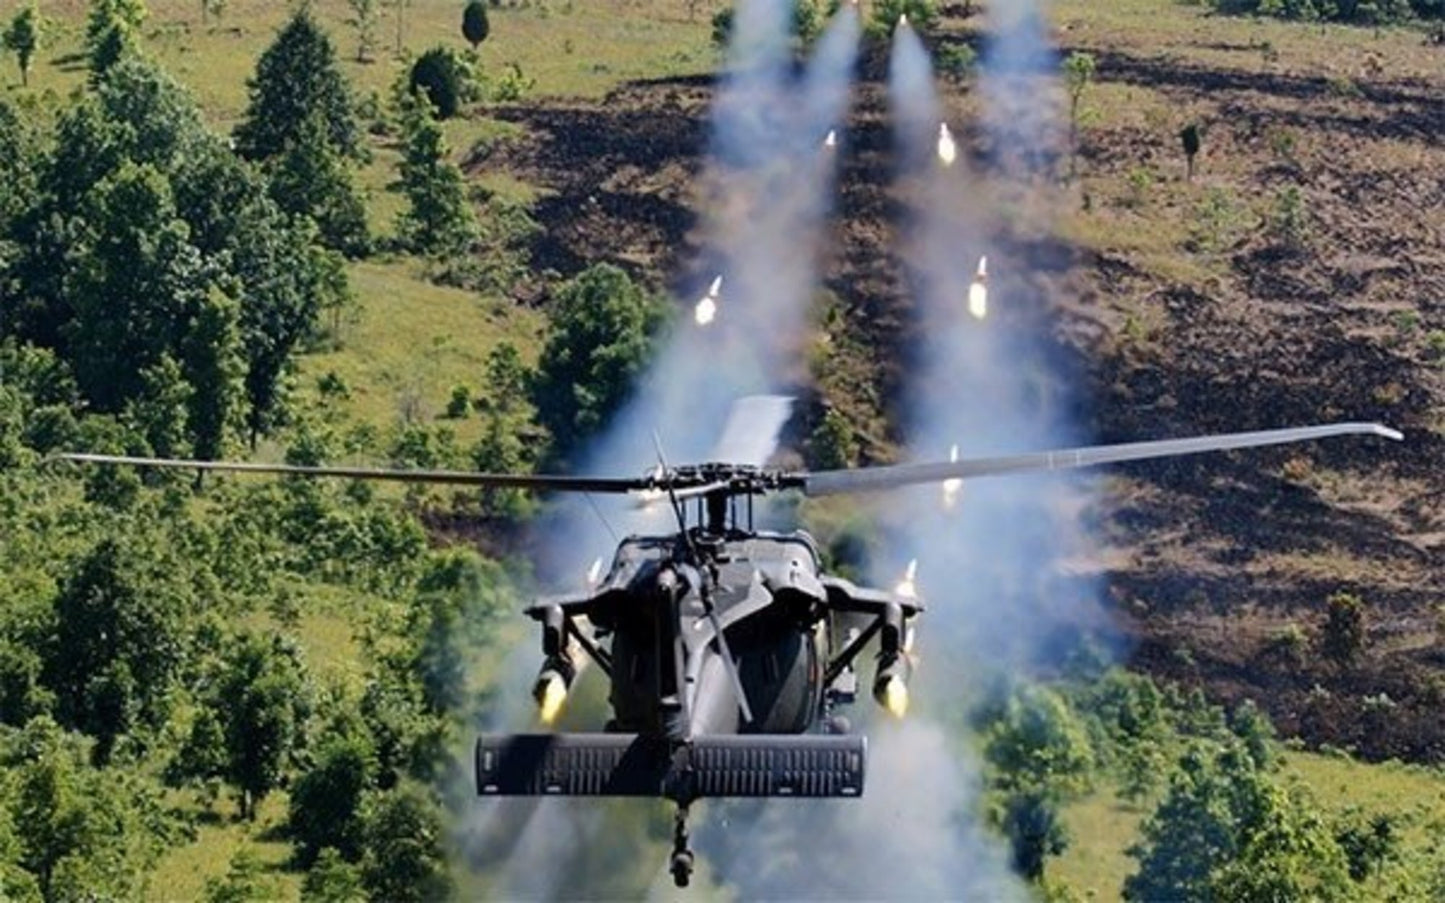 SIKORSKY UH-60 BLACK HAWK GLOSSY POSTER PICTURE PHOTO PRINT BANNER us